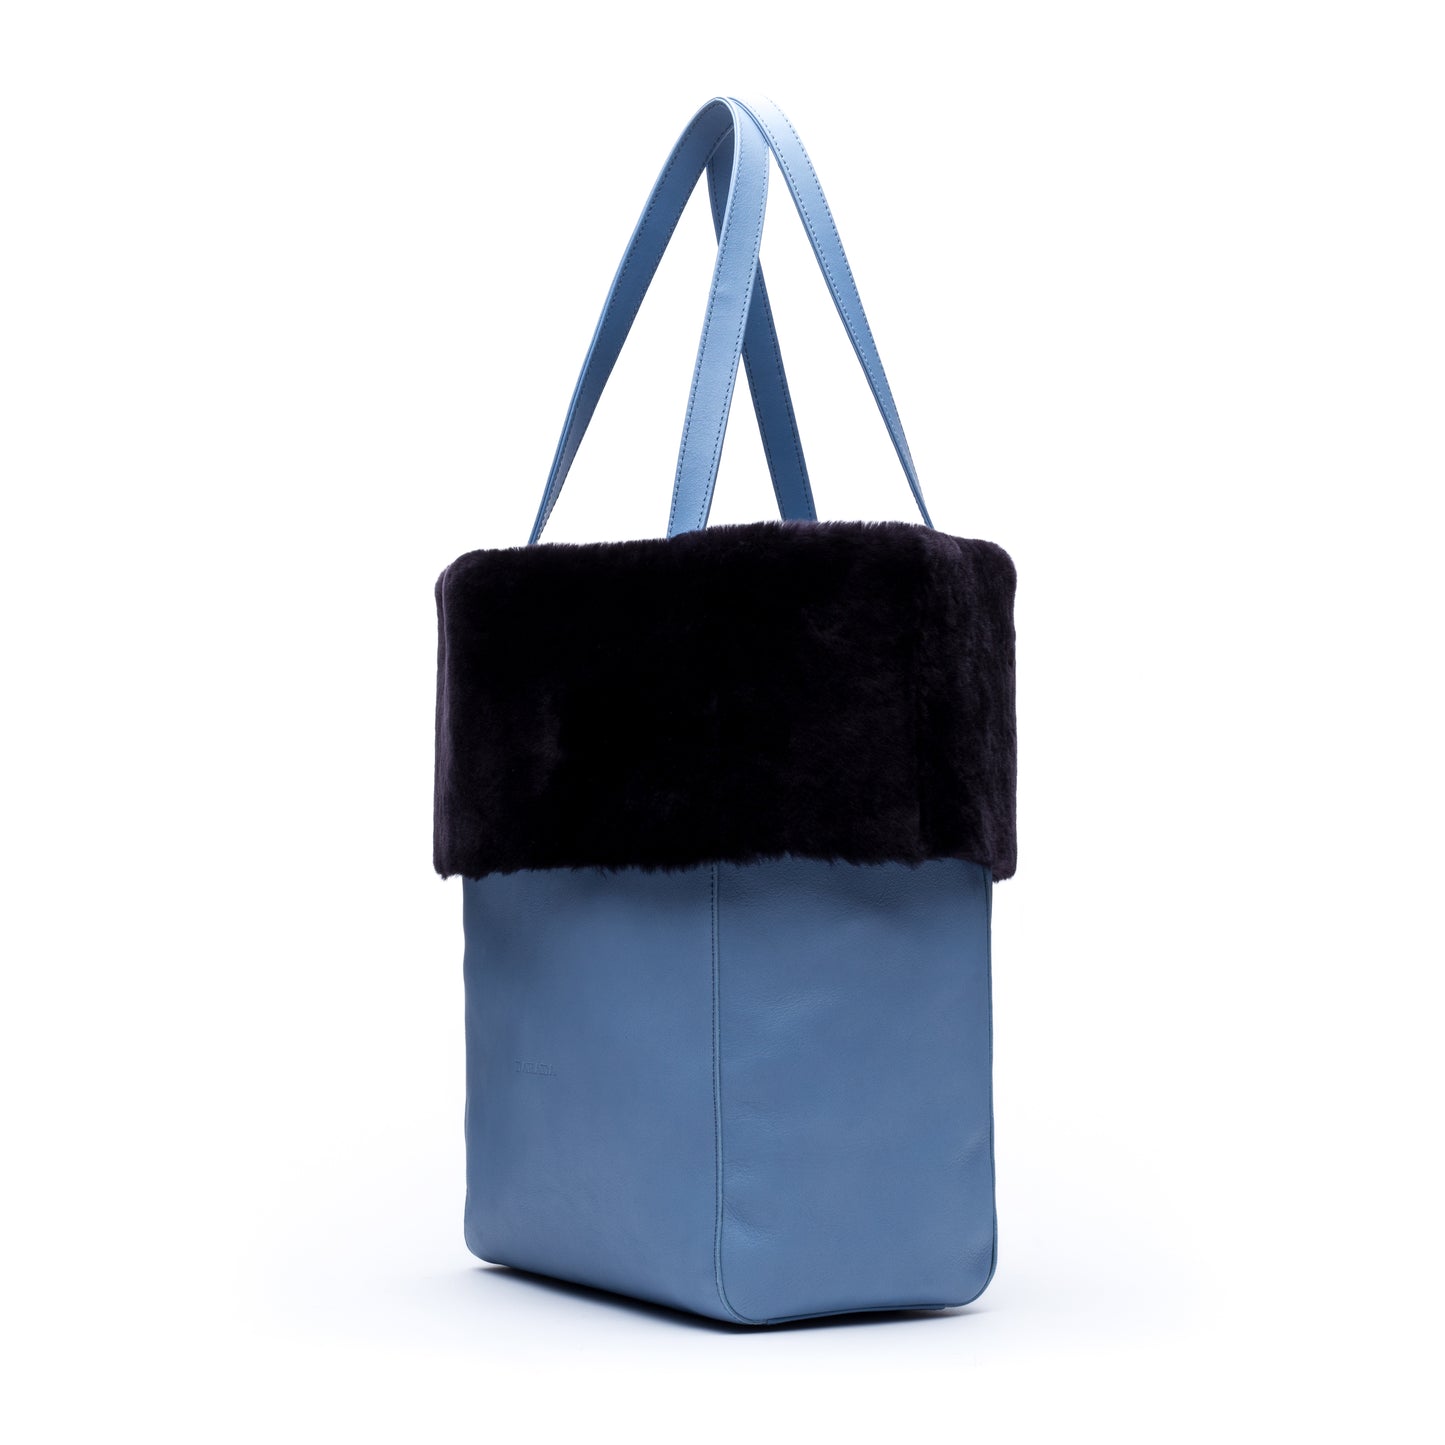 Kaley- Light Blue Leather Tote with Dyed Navy Mouton